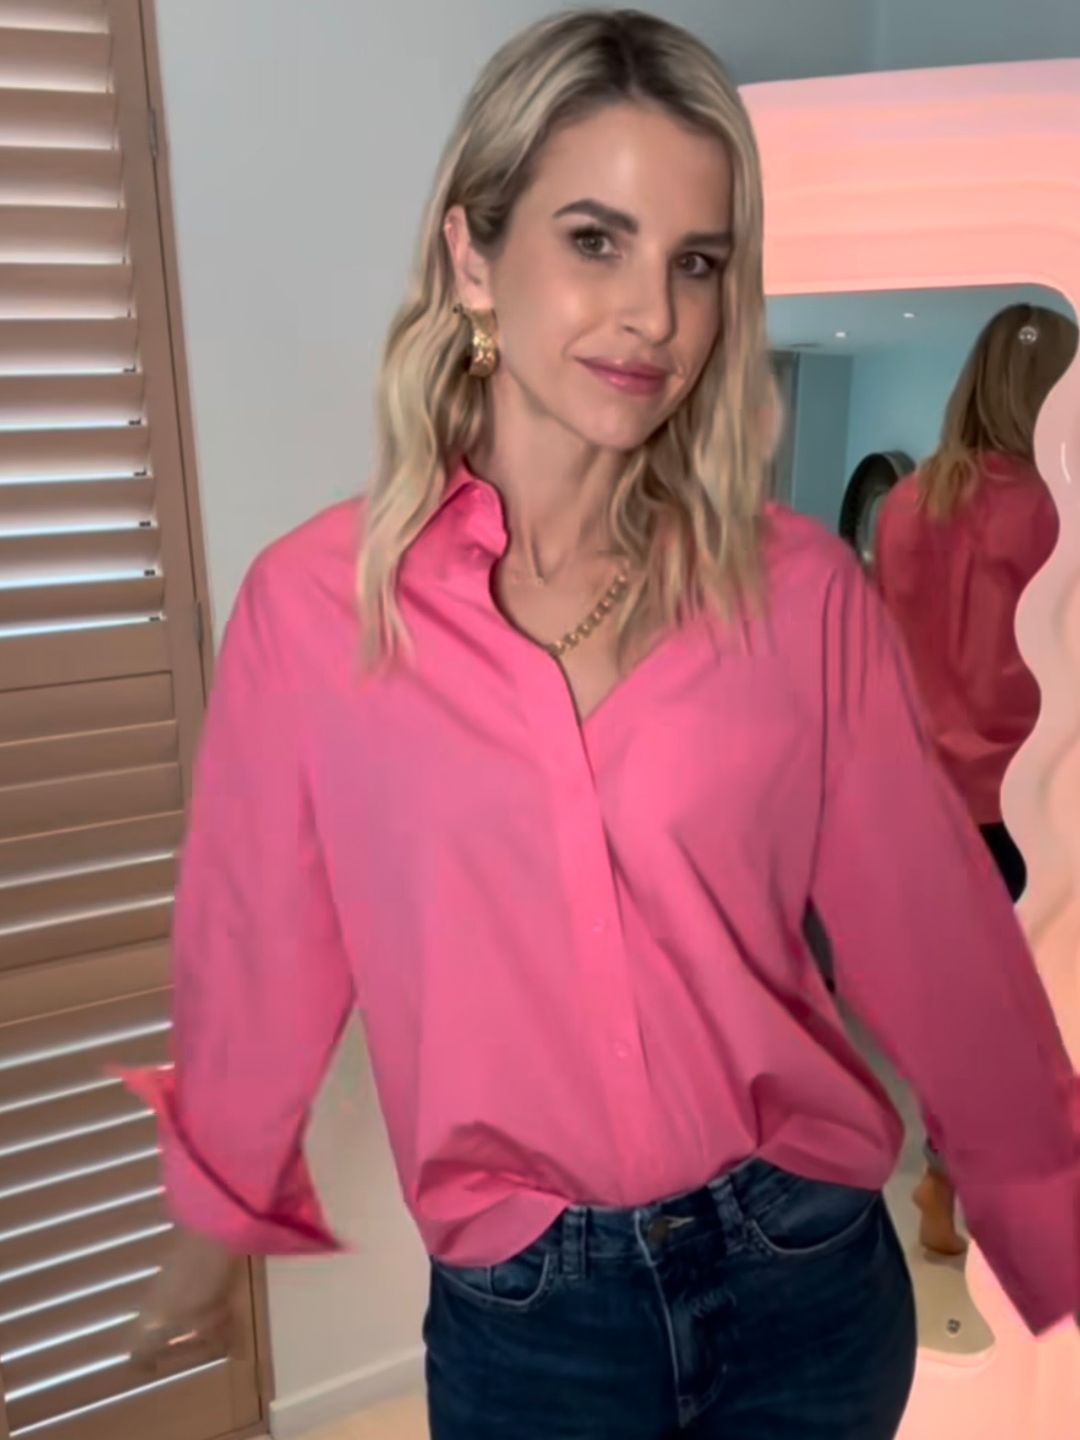 vogue williams in pink shirt and jeans 